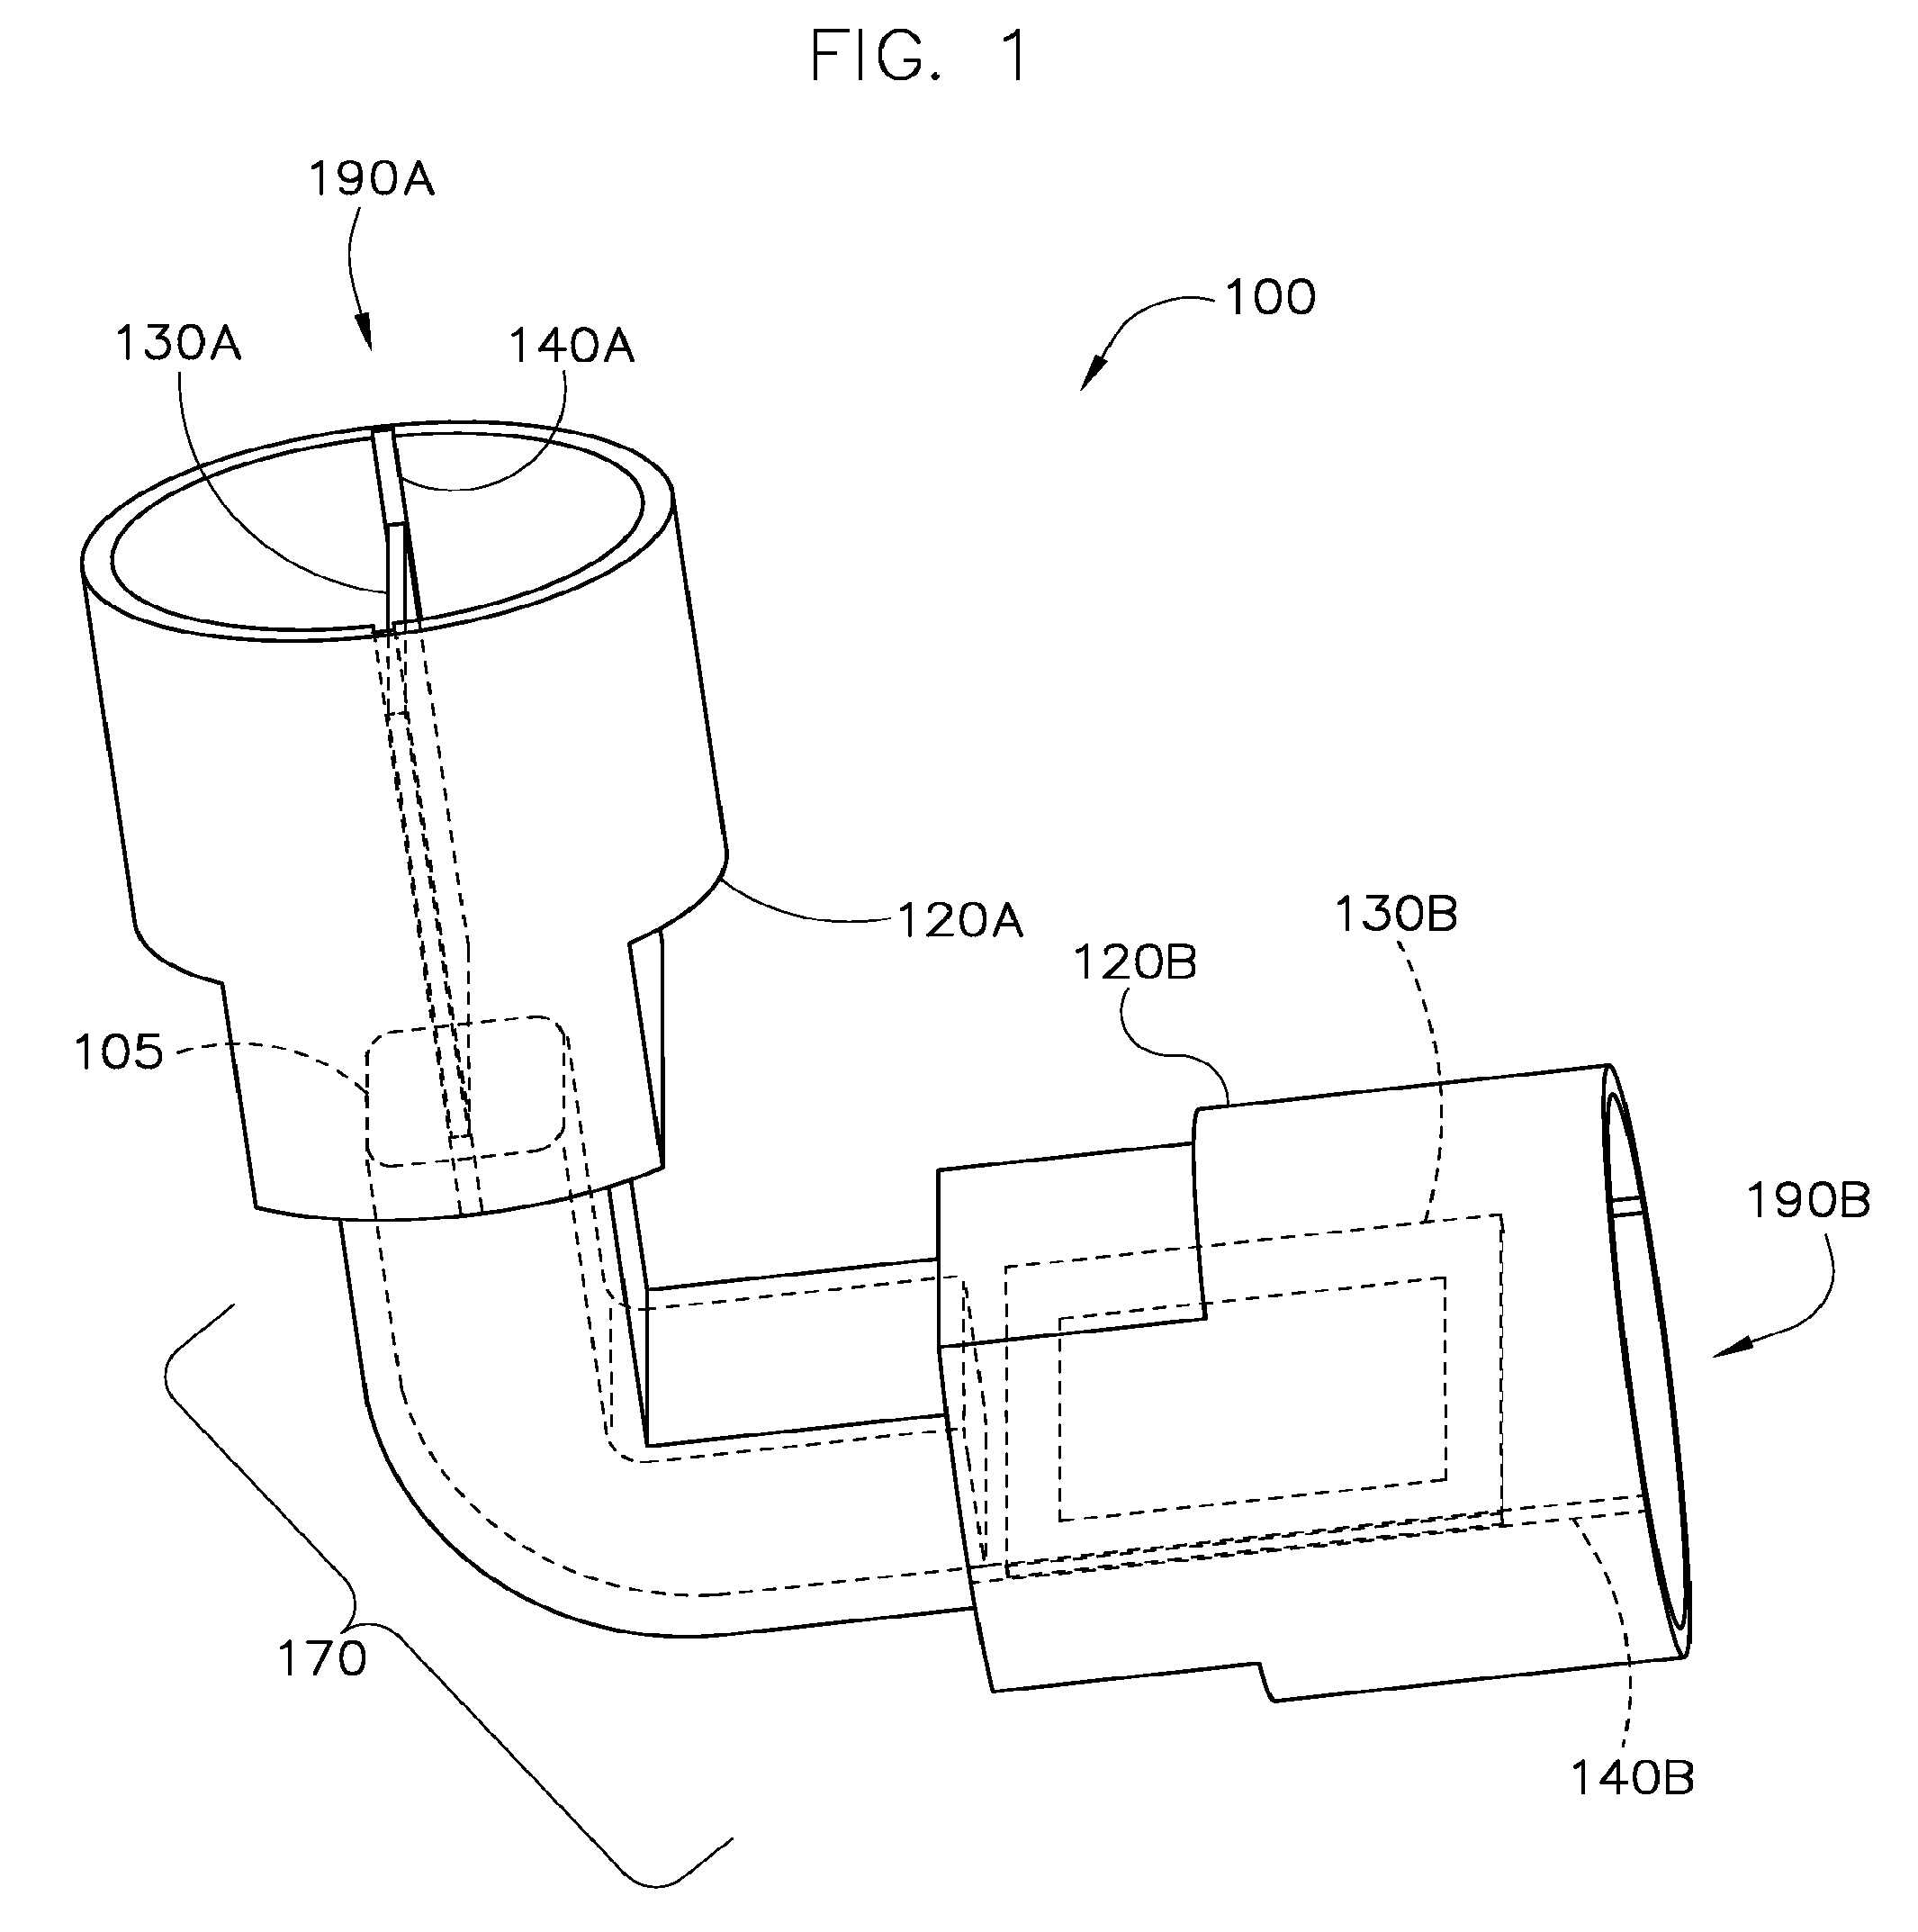 Circular to rectangular waveguide converter including a bend section and mode suppressor